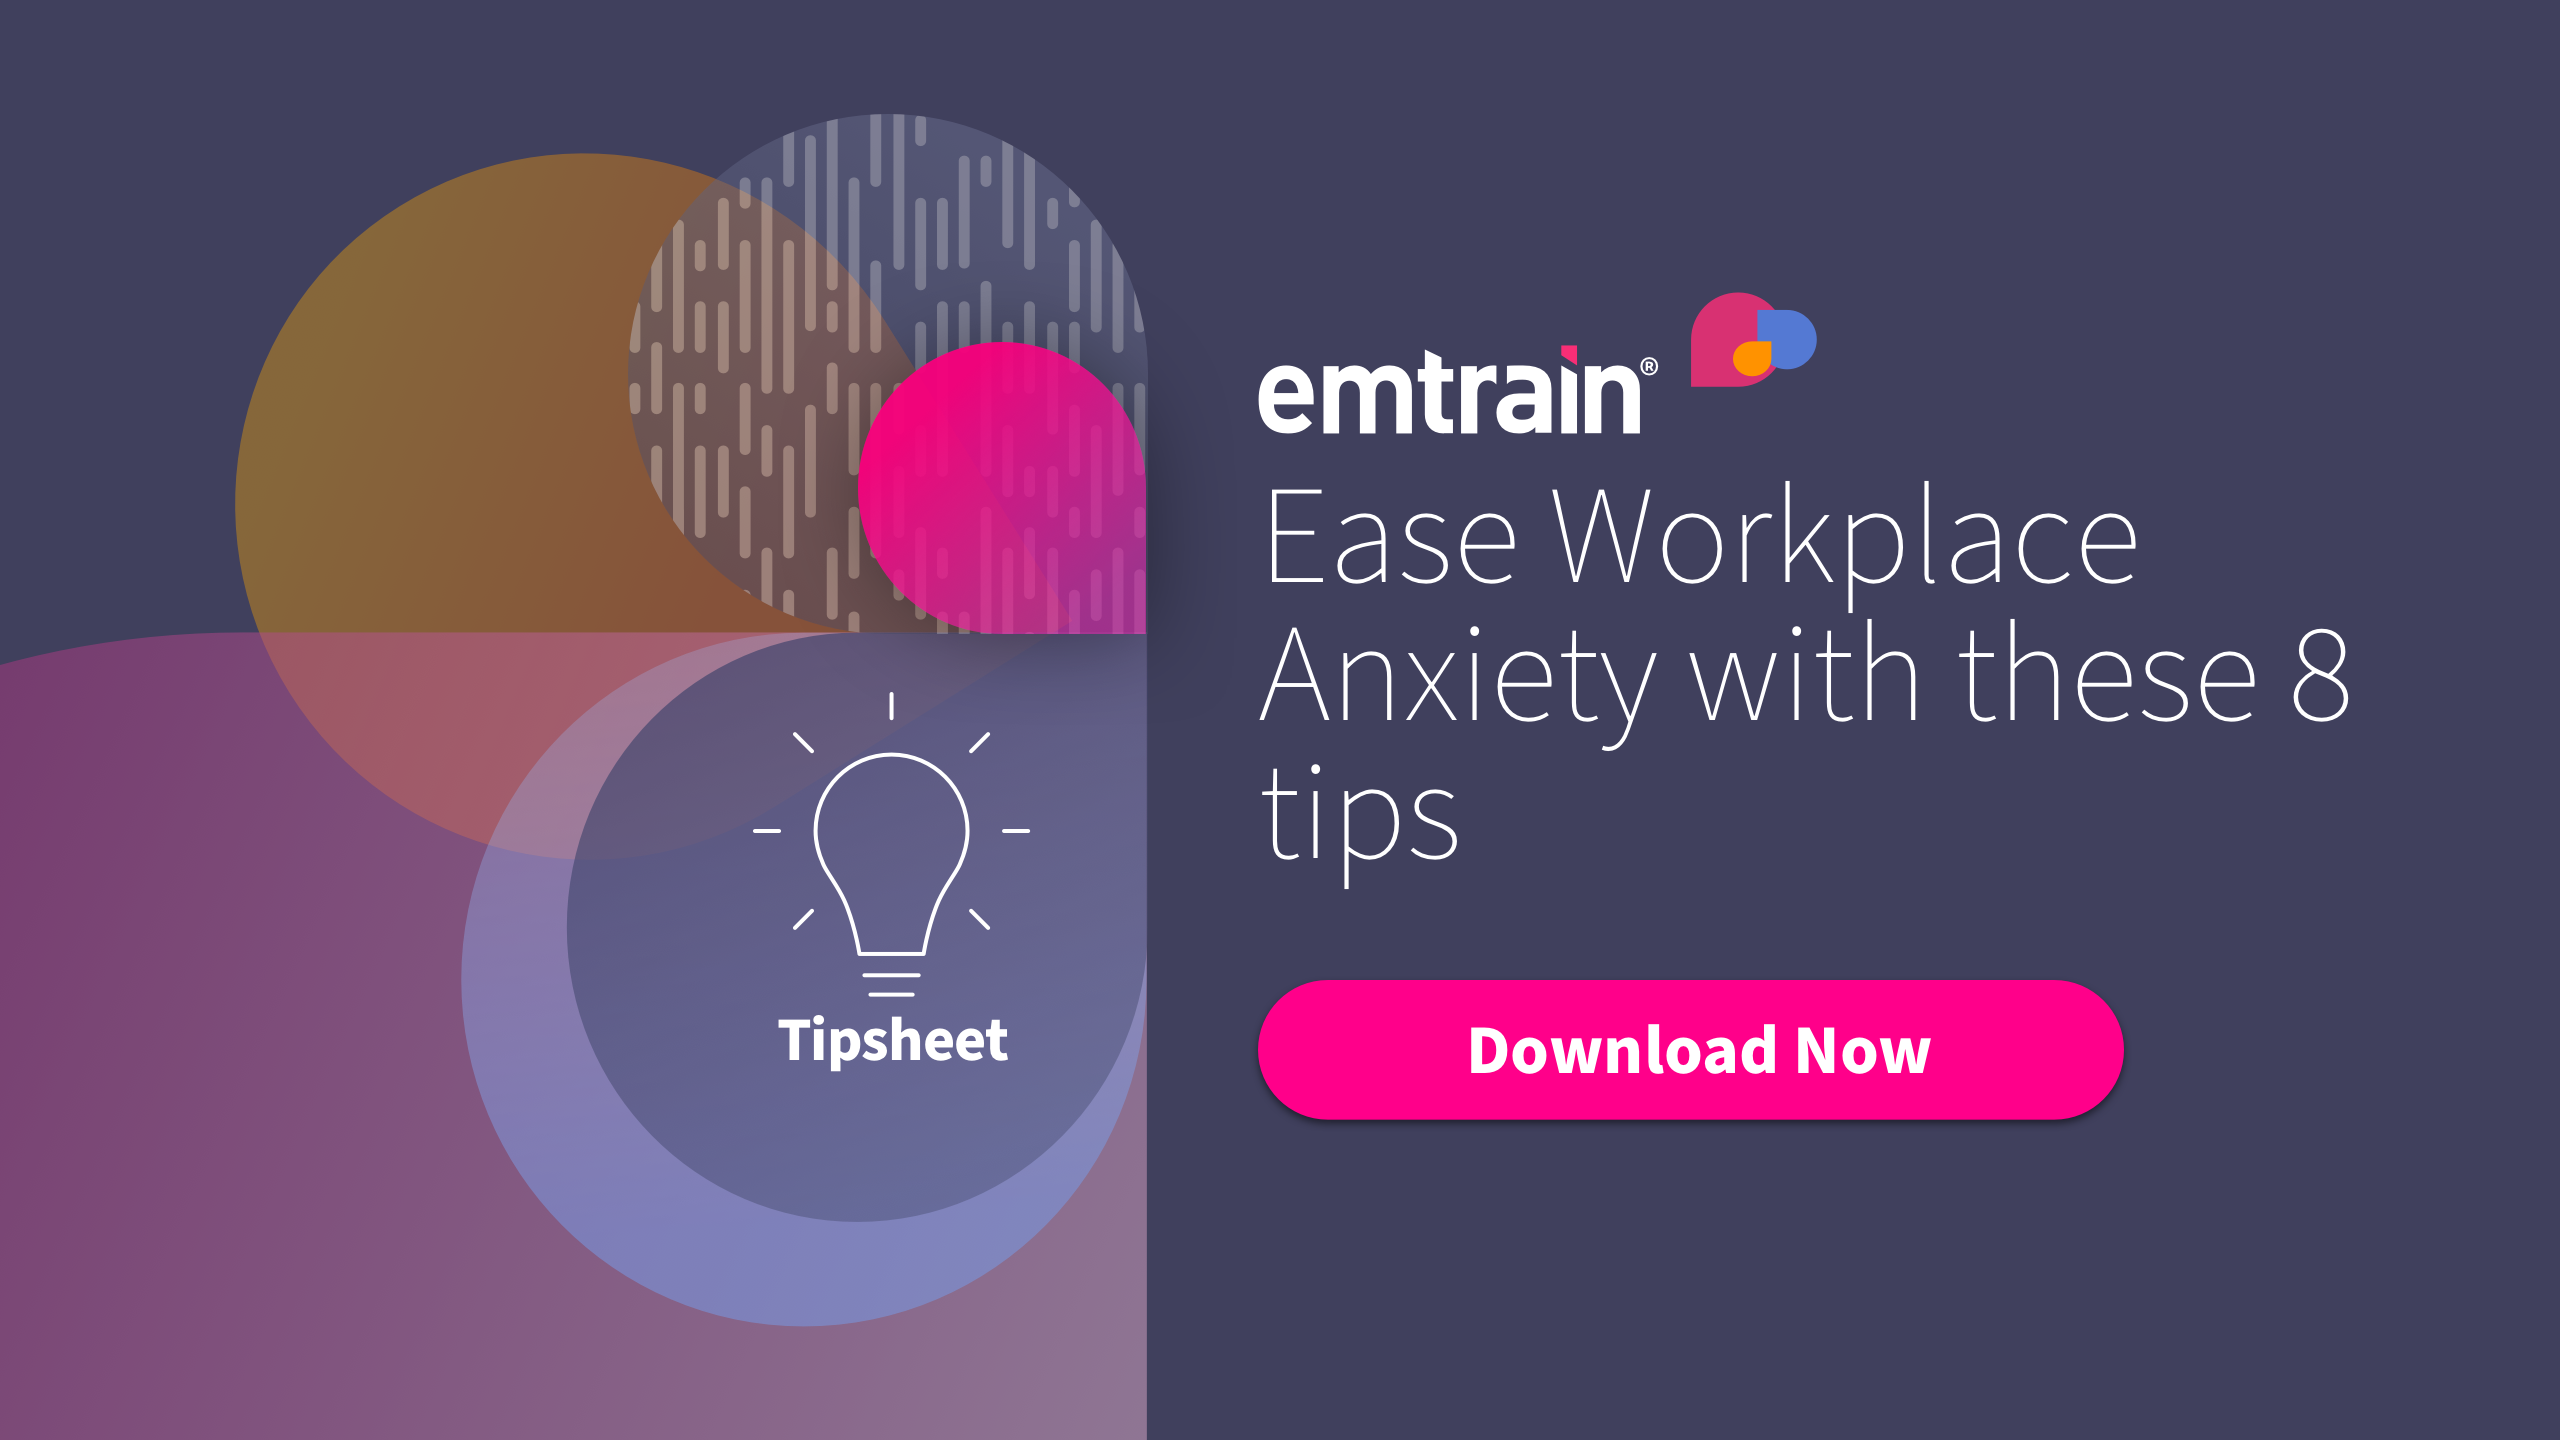 Ease Workplace Anxiety with these 8 tips